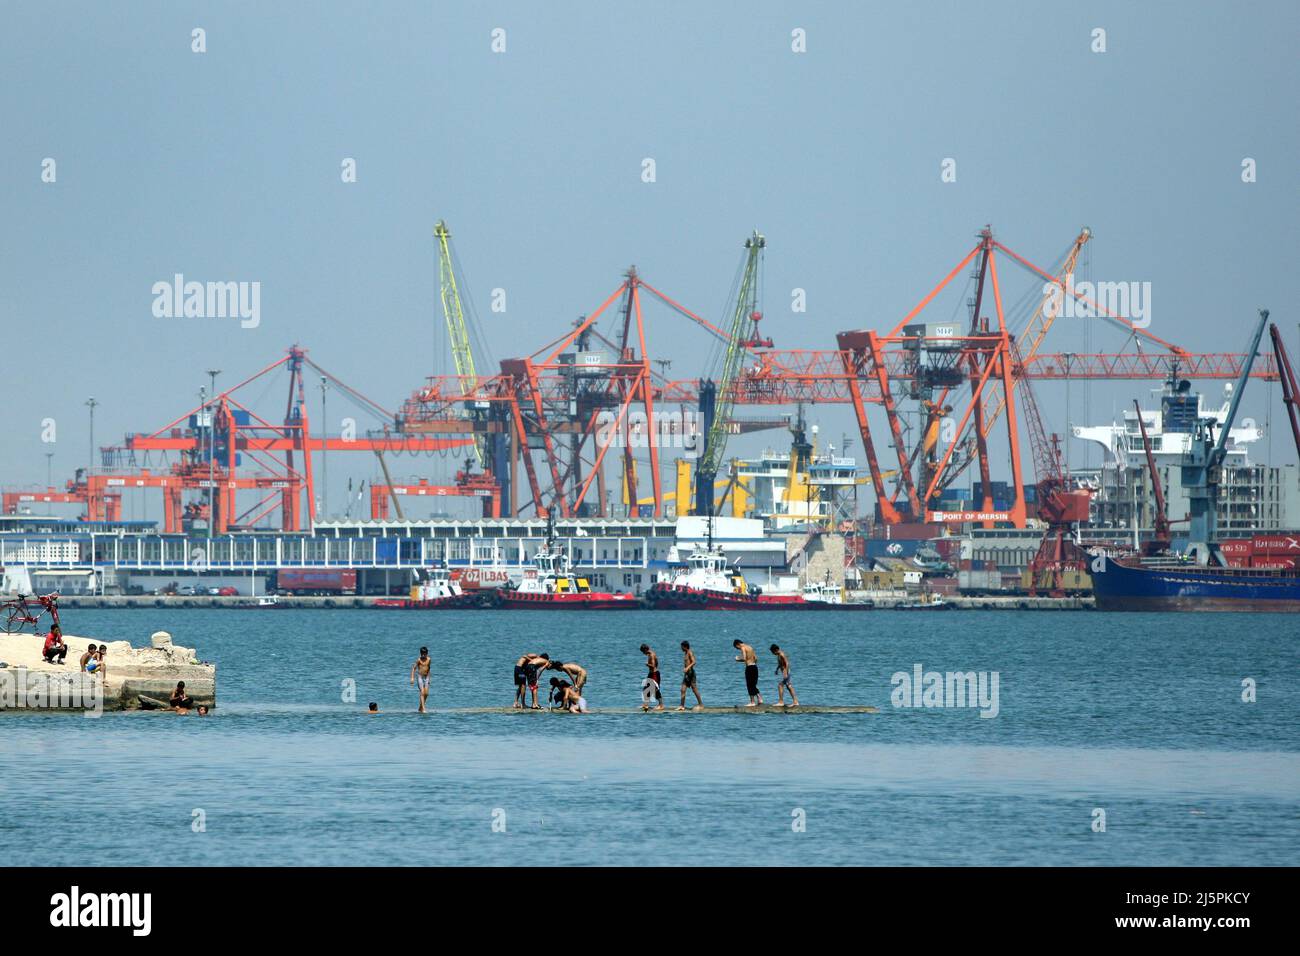 Turkish boys play on a concrete platform in the Mediterranean Sea on a hot summer day at Mersin in Turkey. In the background is the Port of Mersin. Stock Photo